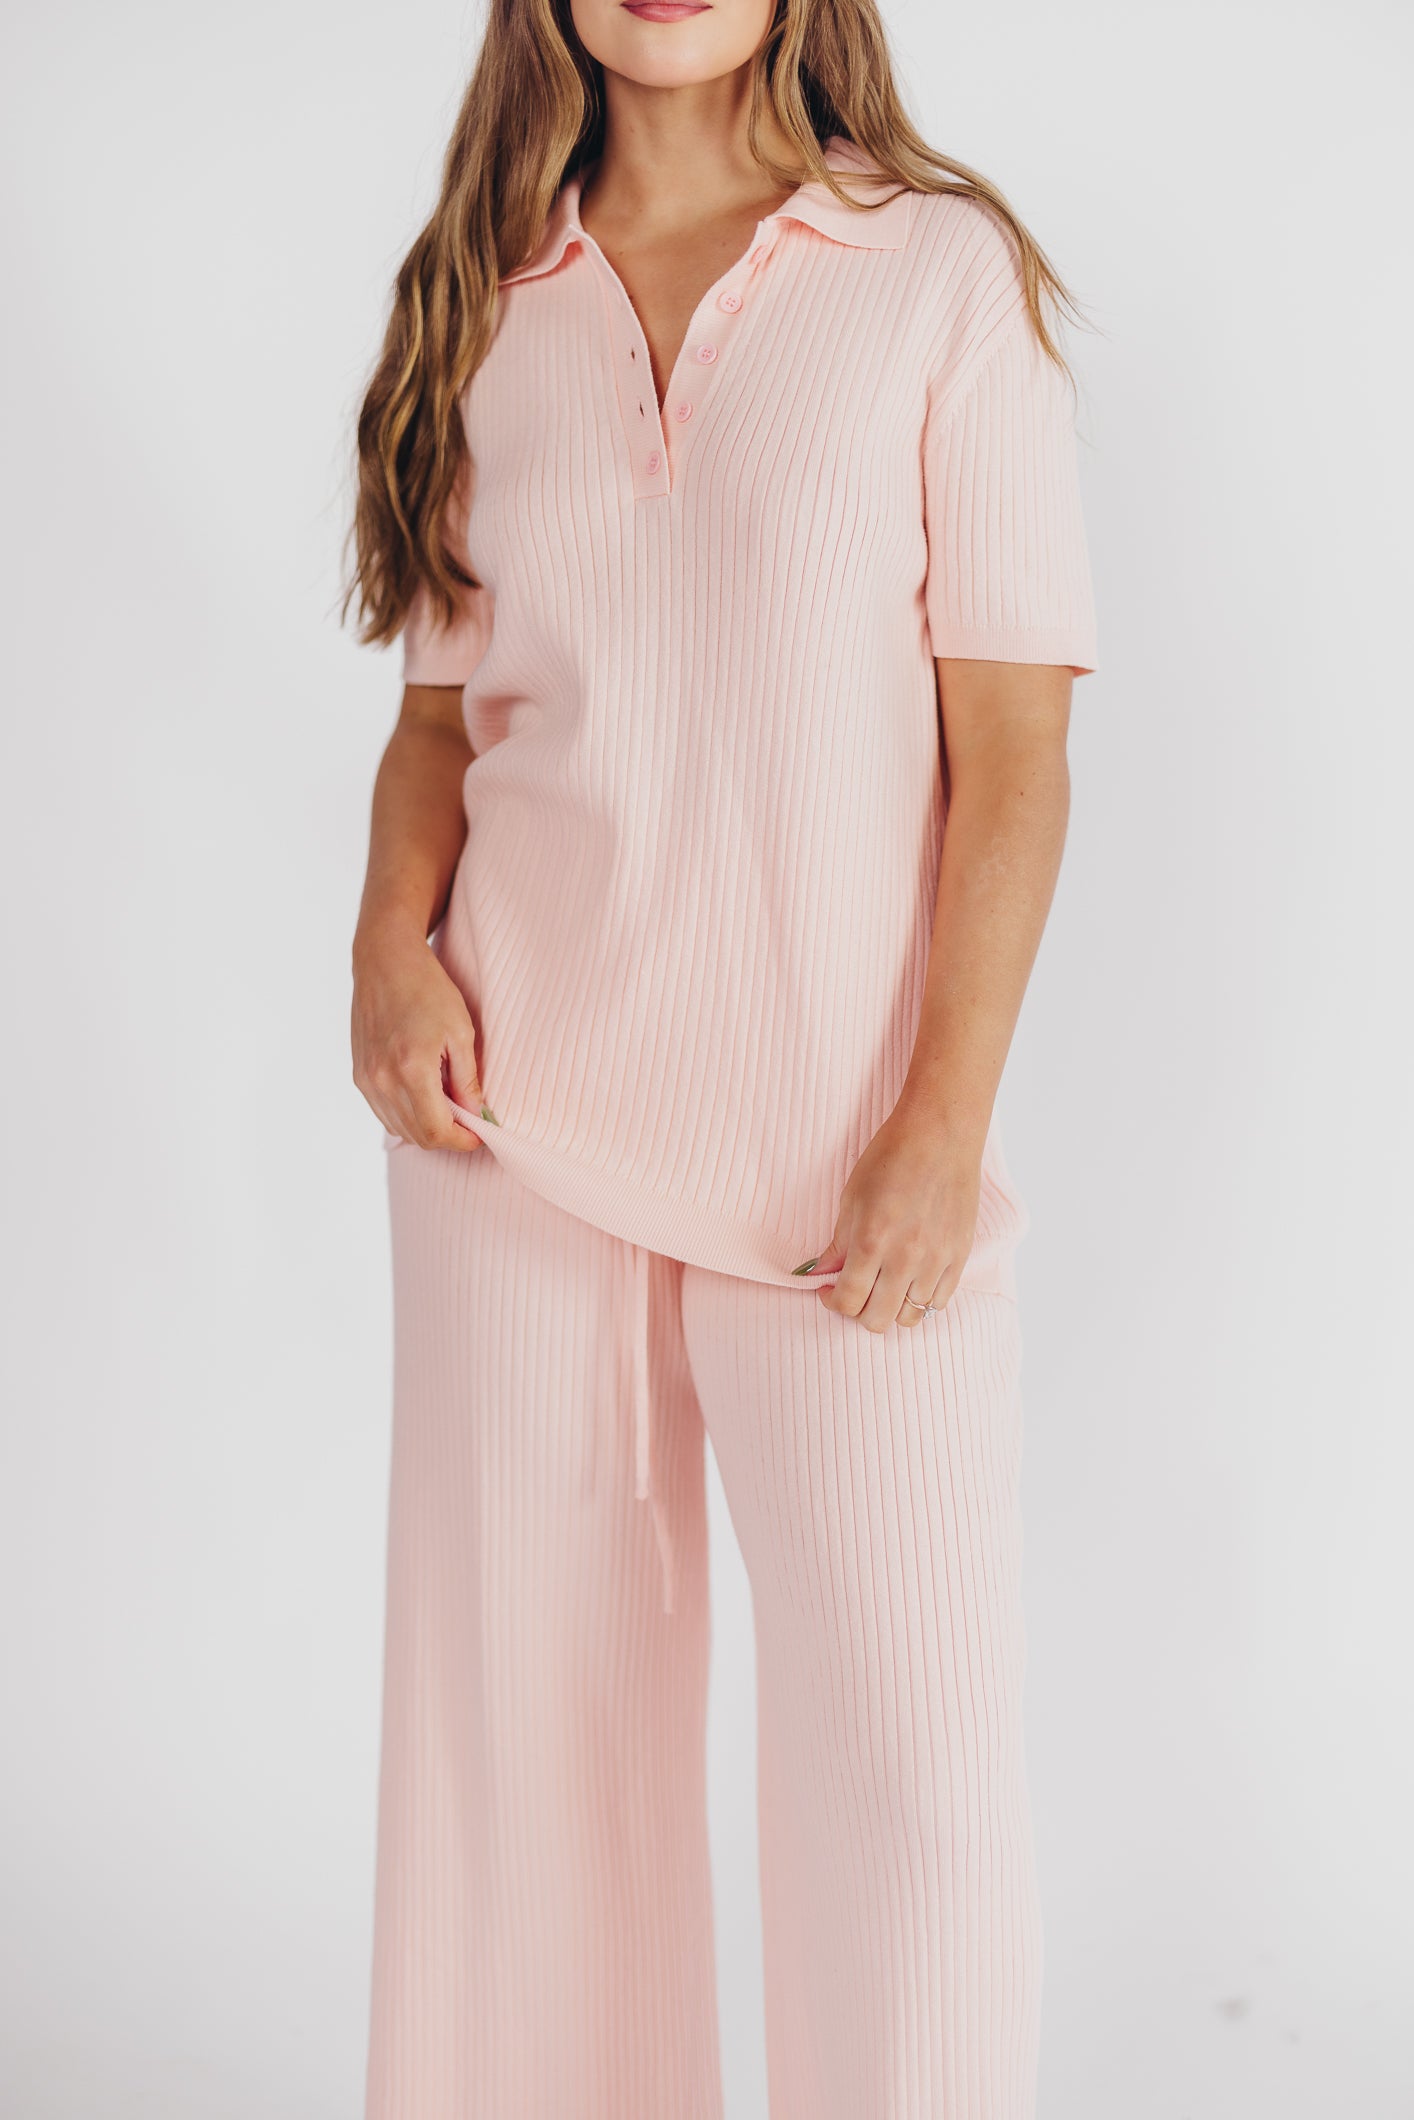 Rue 100% Cotton Wide Leg Pants in Soft Pink